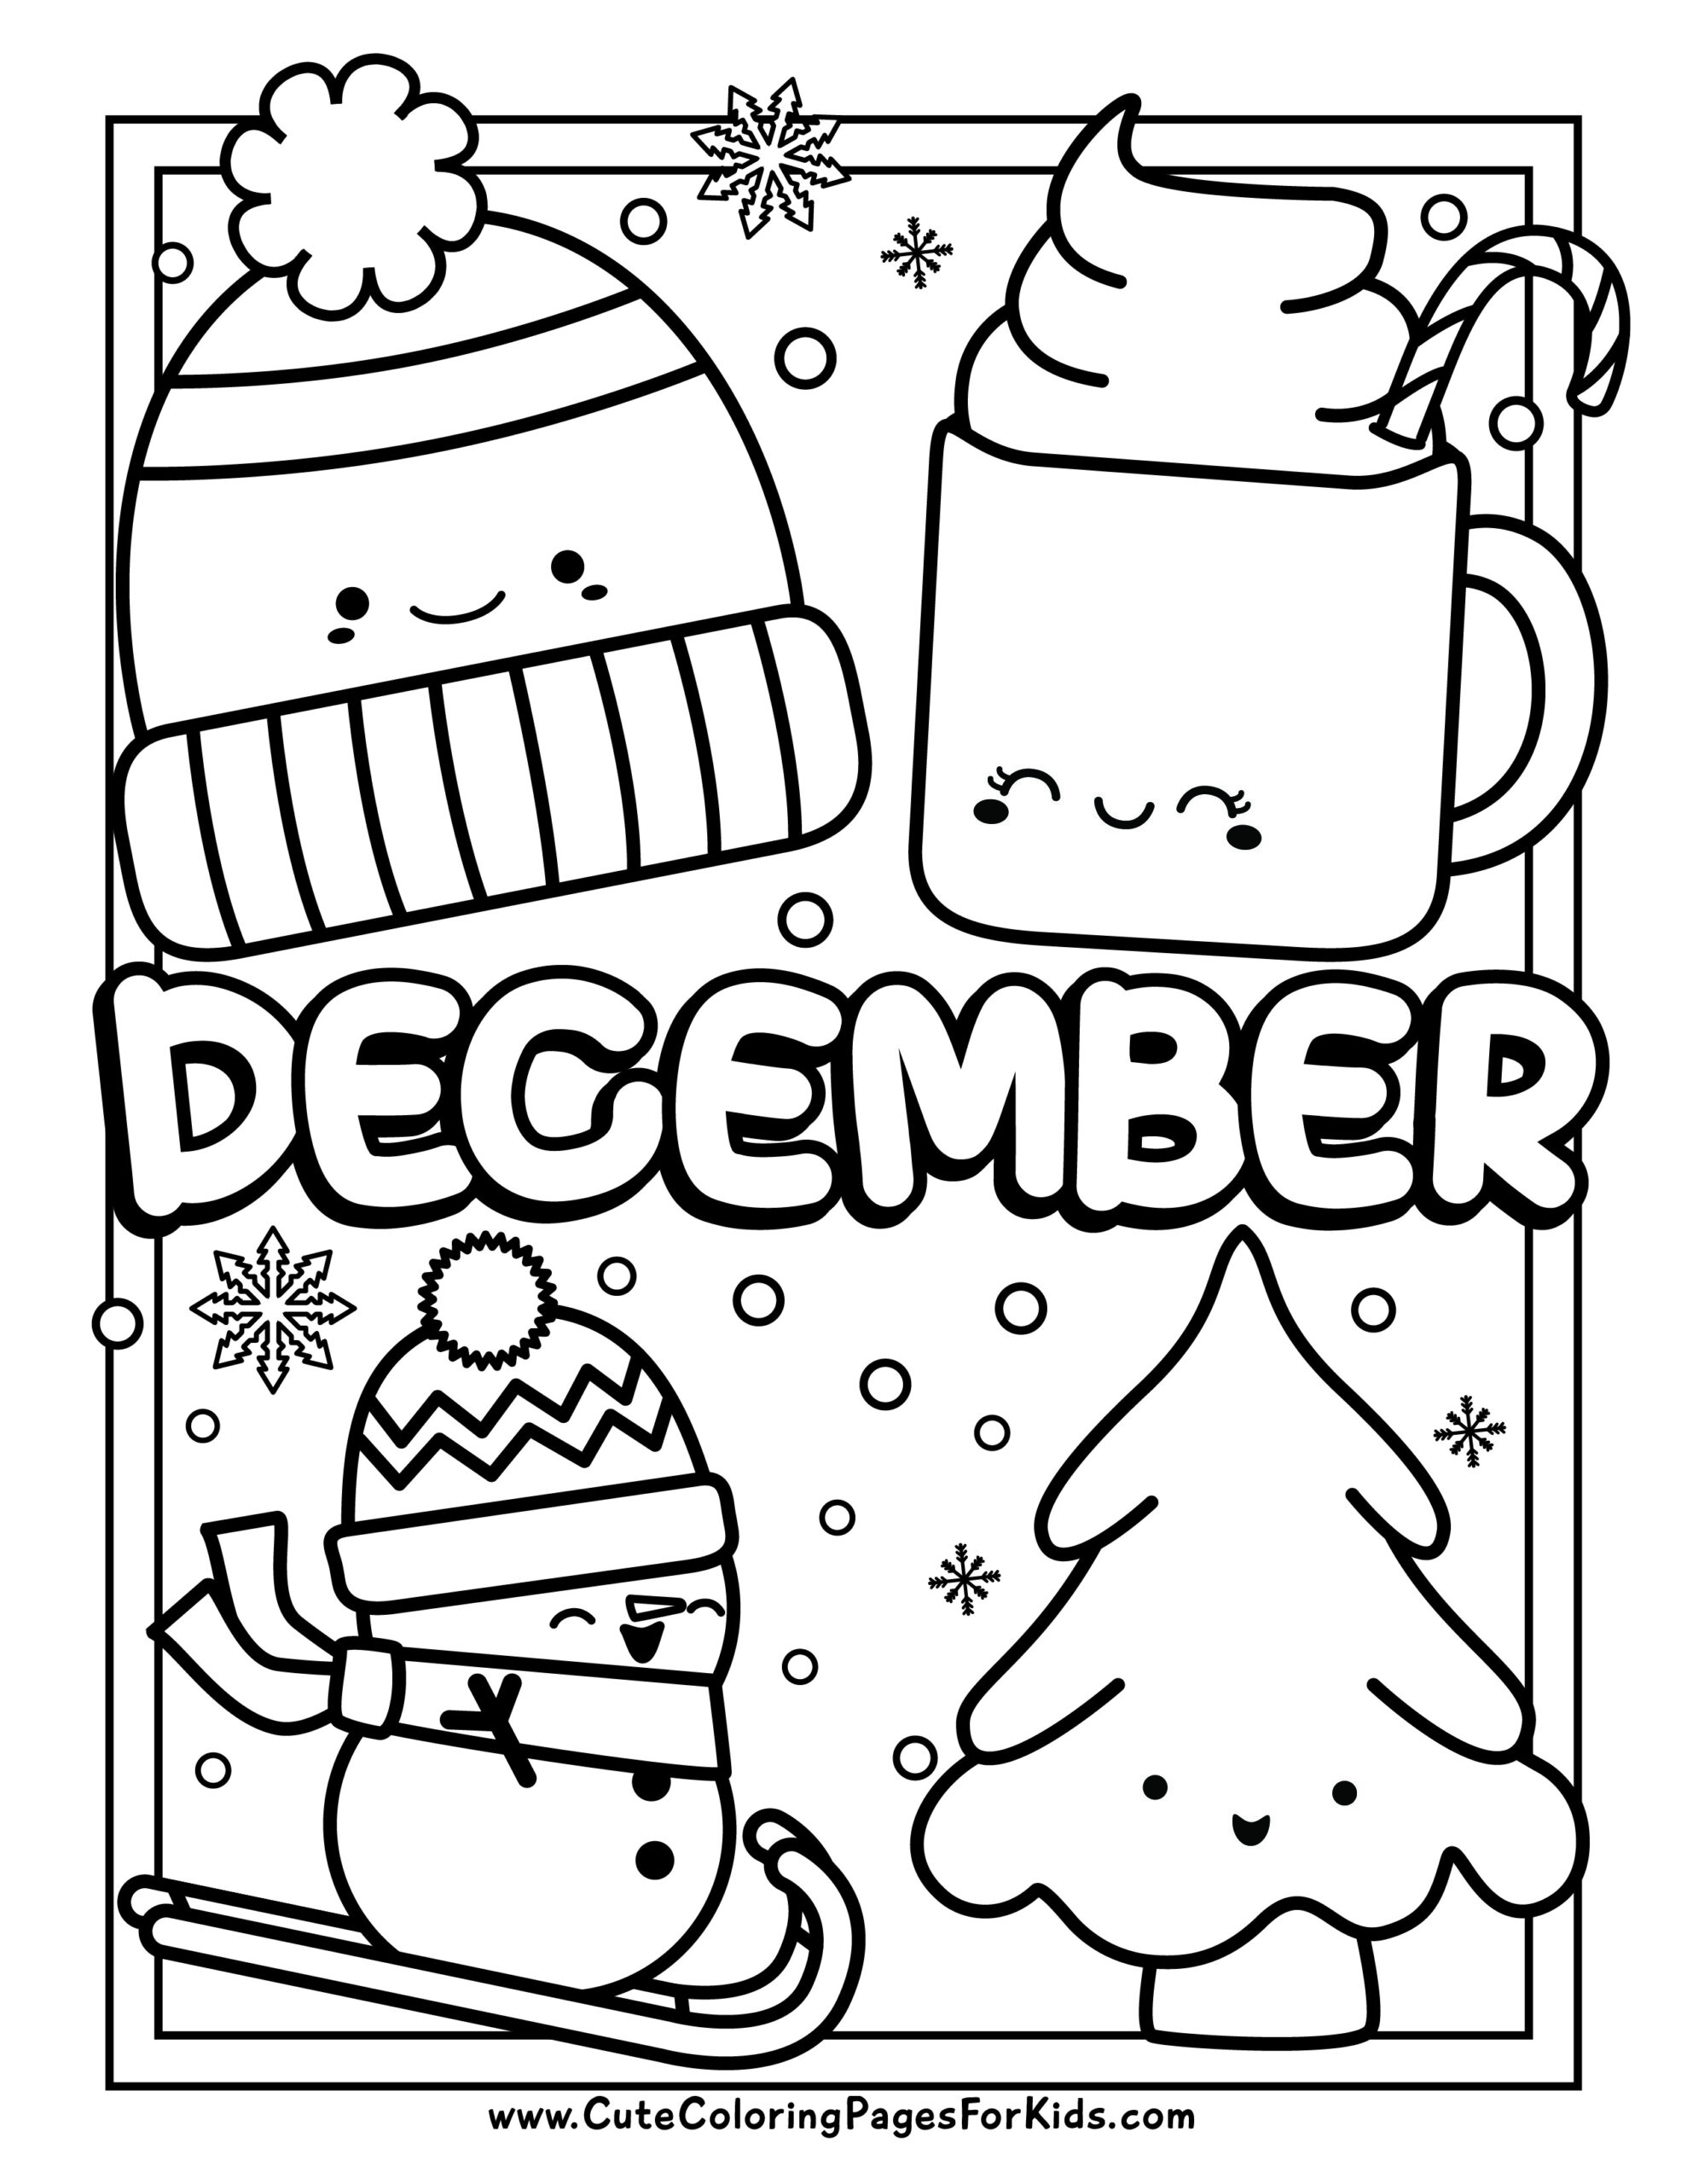 December Coloring Pages: 4 Free Printable Coloring Sheets Cute